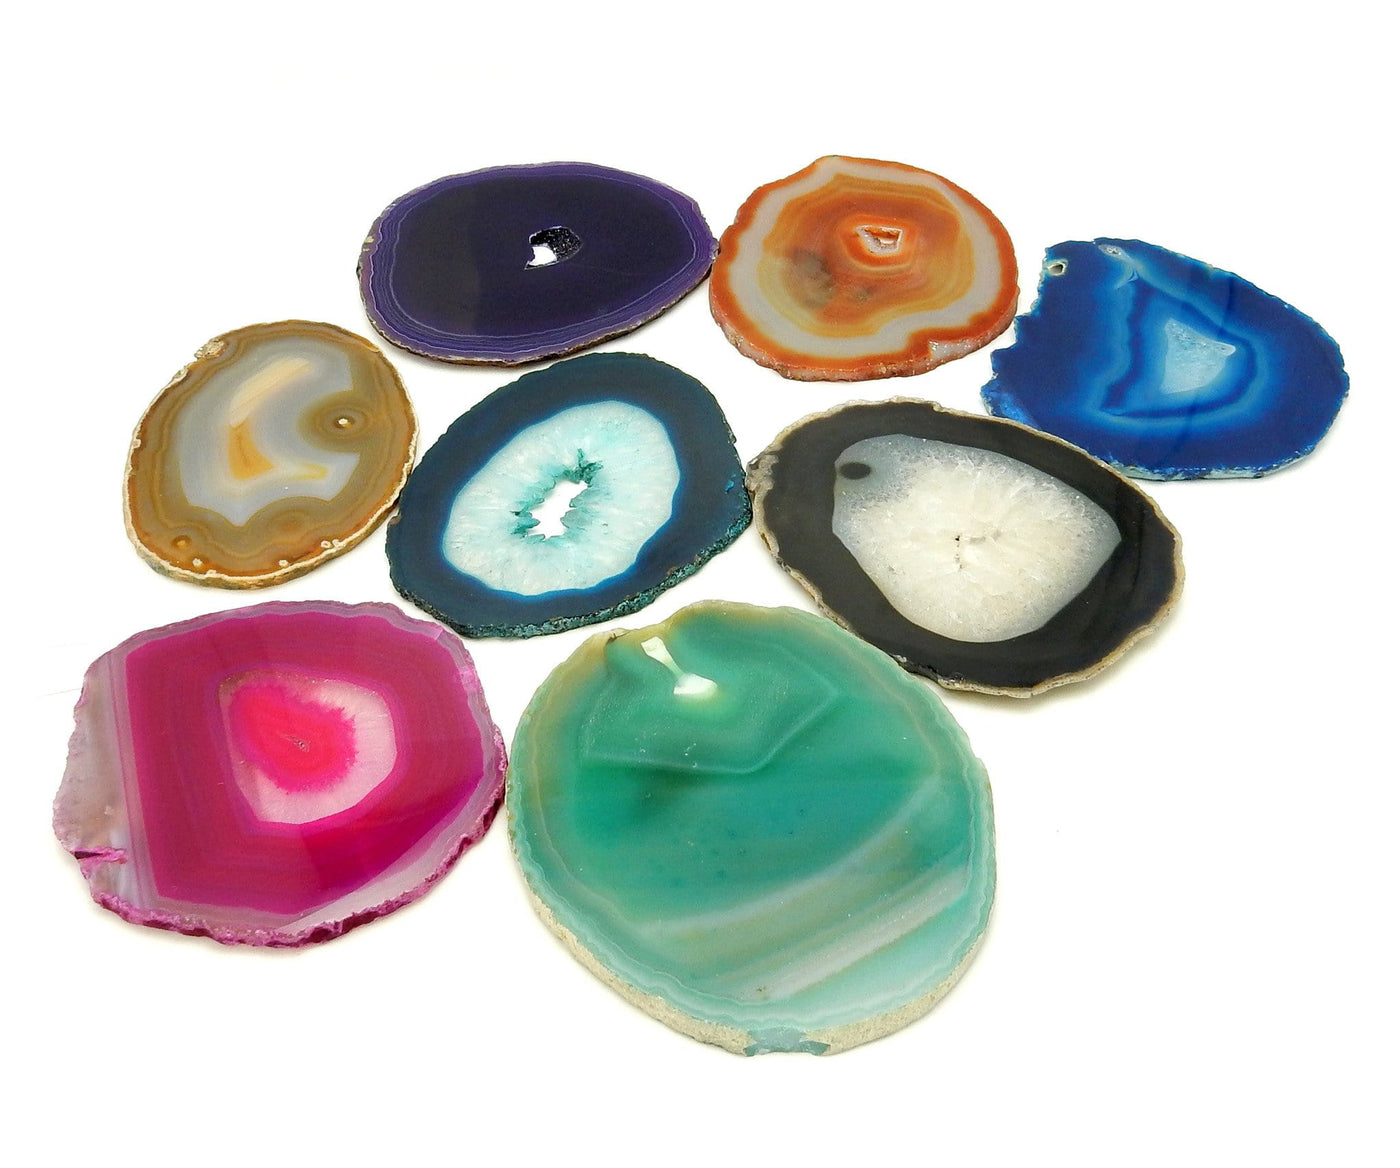 Picture of Multiple color agates size 4, they are also being displayed on a white back ground.